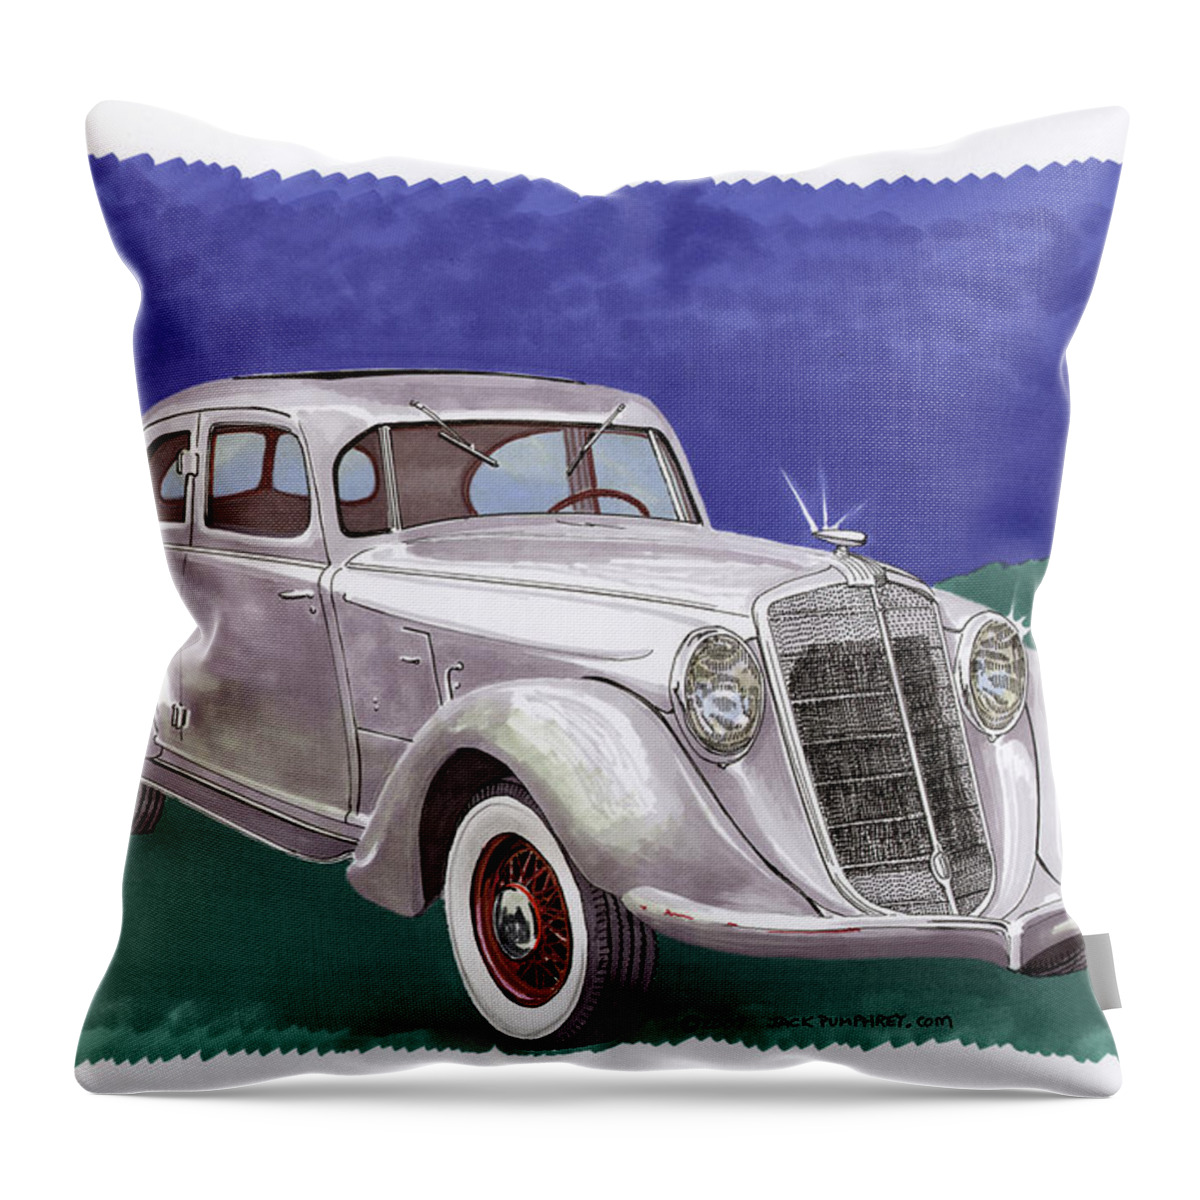 A Watercolor Portrait Of The 1935 Hupmobile Model 527 T Which Was An Automobile Built From 1909 Through 1940 By The Hupp Motor Company Throw Pillow featuring the painting 1935 Hupmobile Model 527 T by Jack Pumphrey